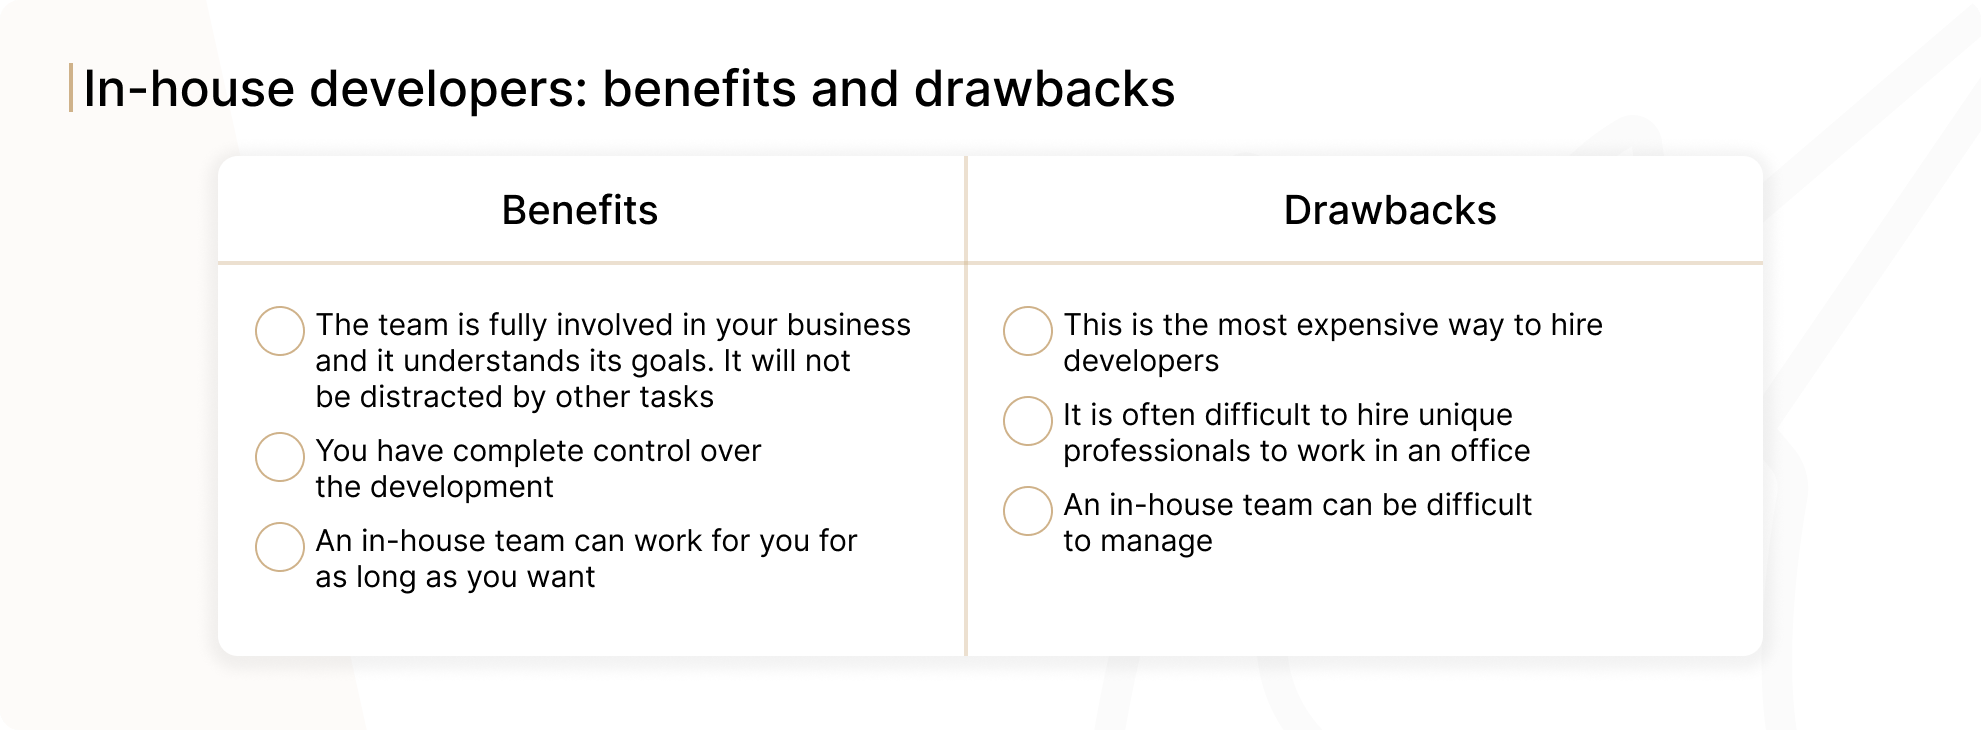 Benefits and drawbacks of hiring in-house developers